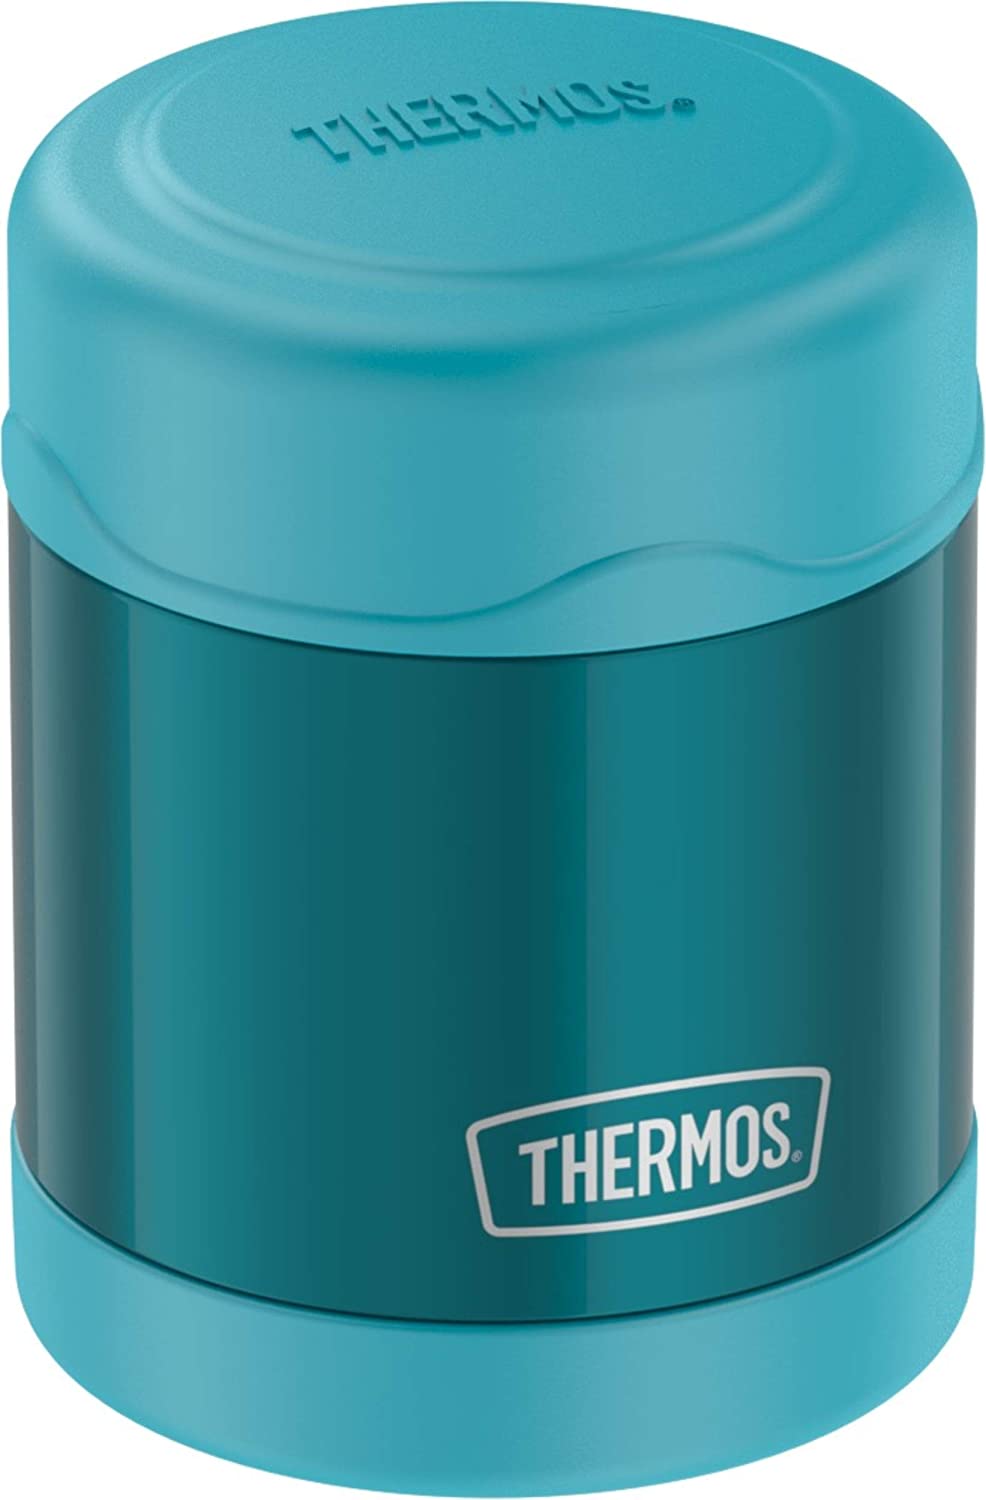 Thermos, 10 oz, Teal, Stainless Steel Vacuum Insulated Food Jar